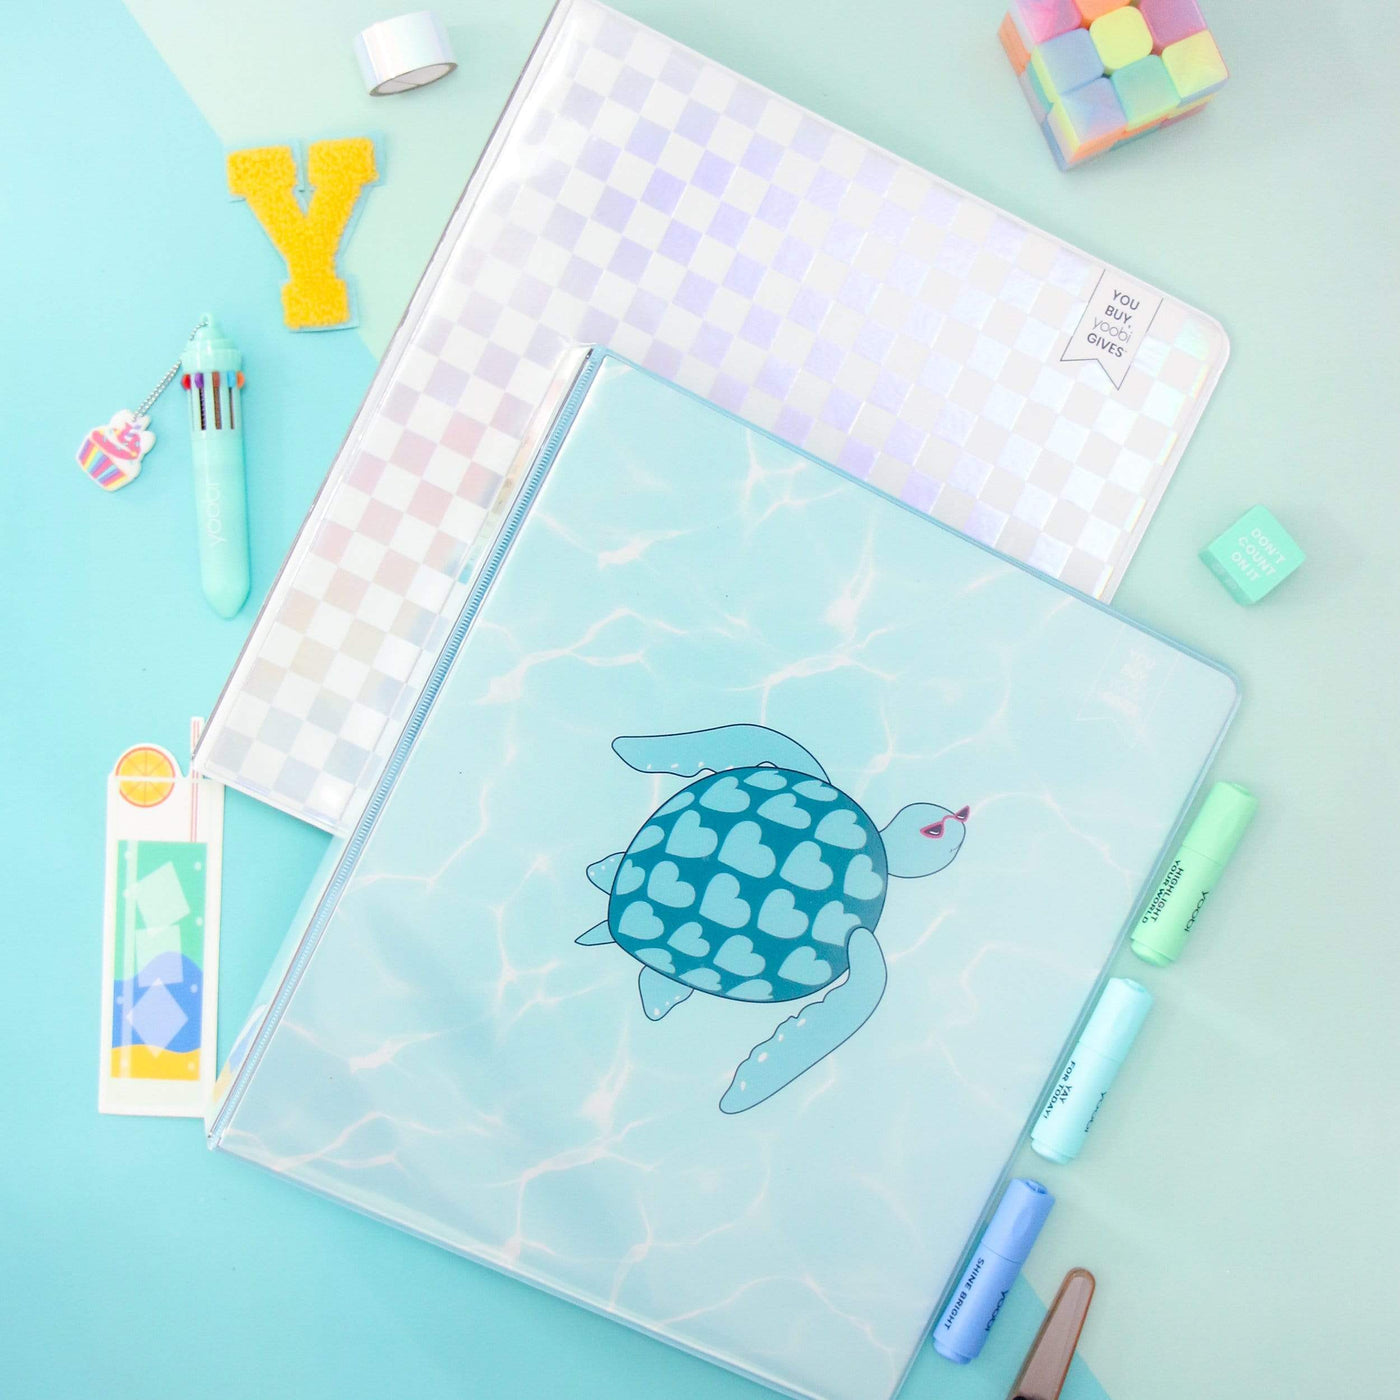 lifestyle image of turtle binder and holographic check binder with pen and markers